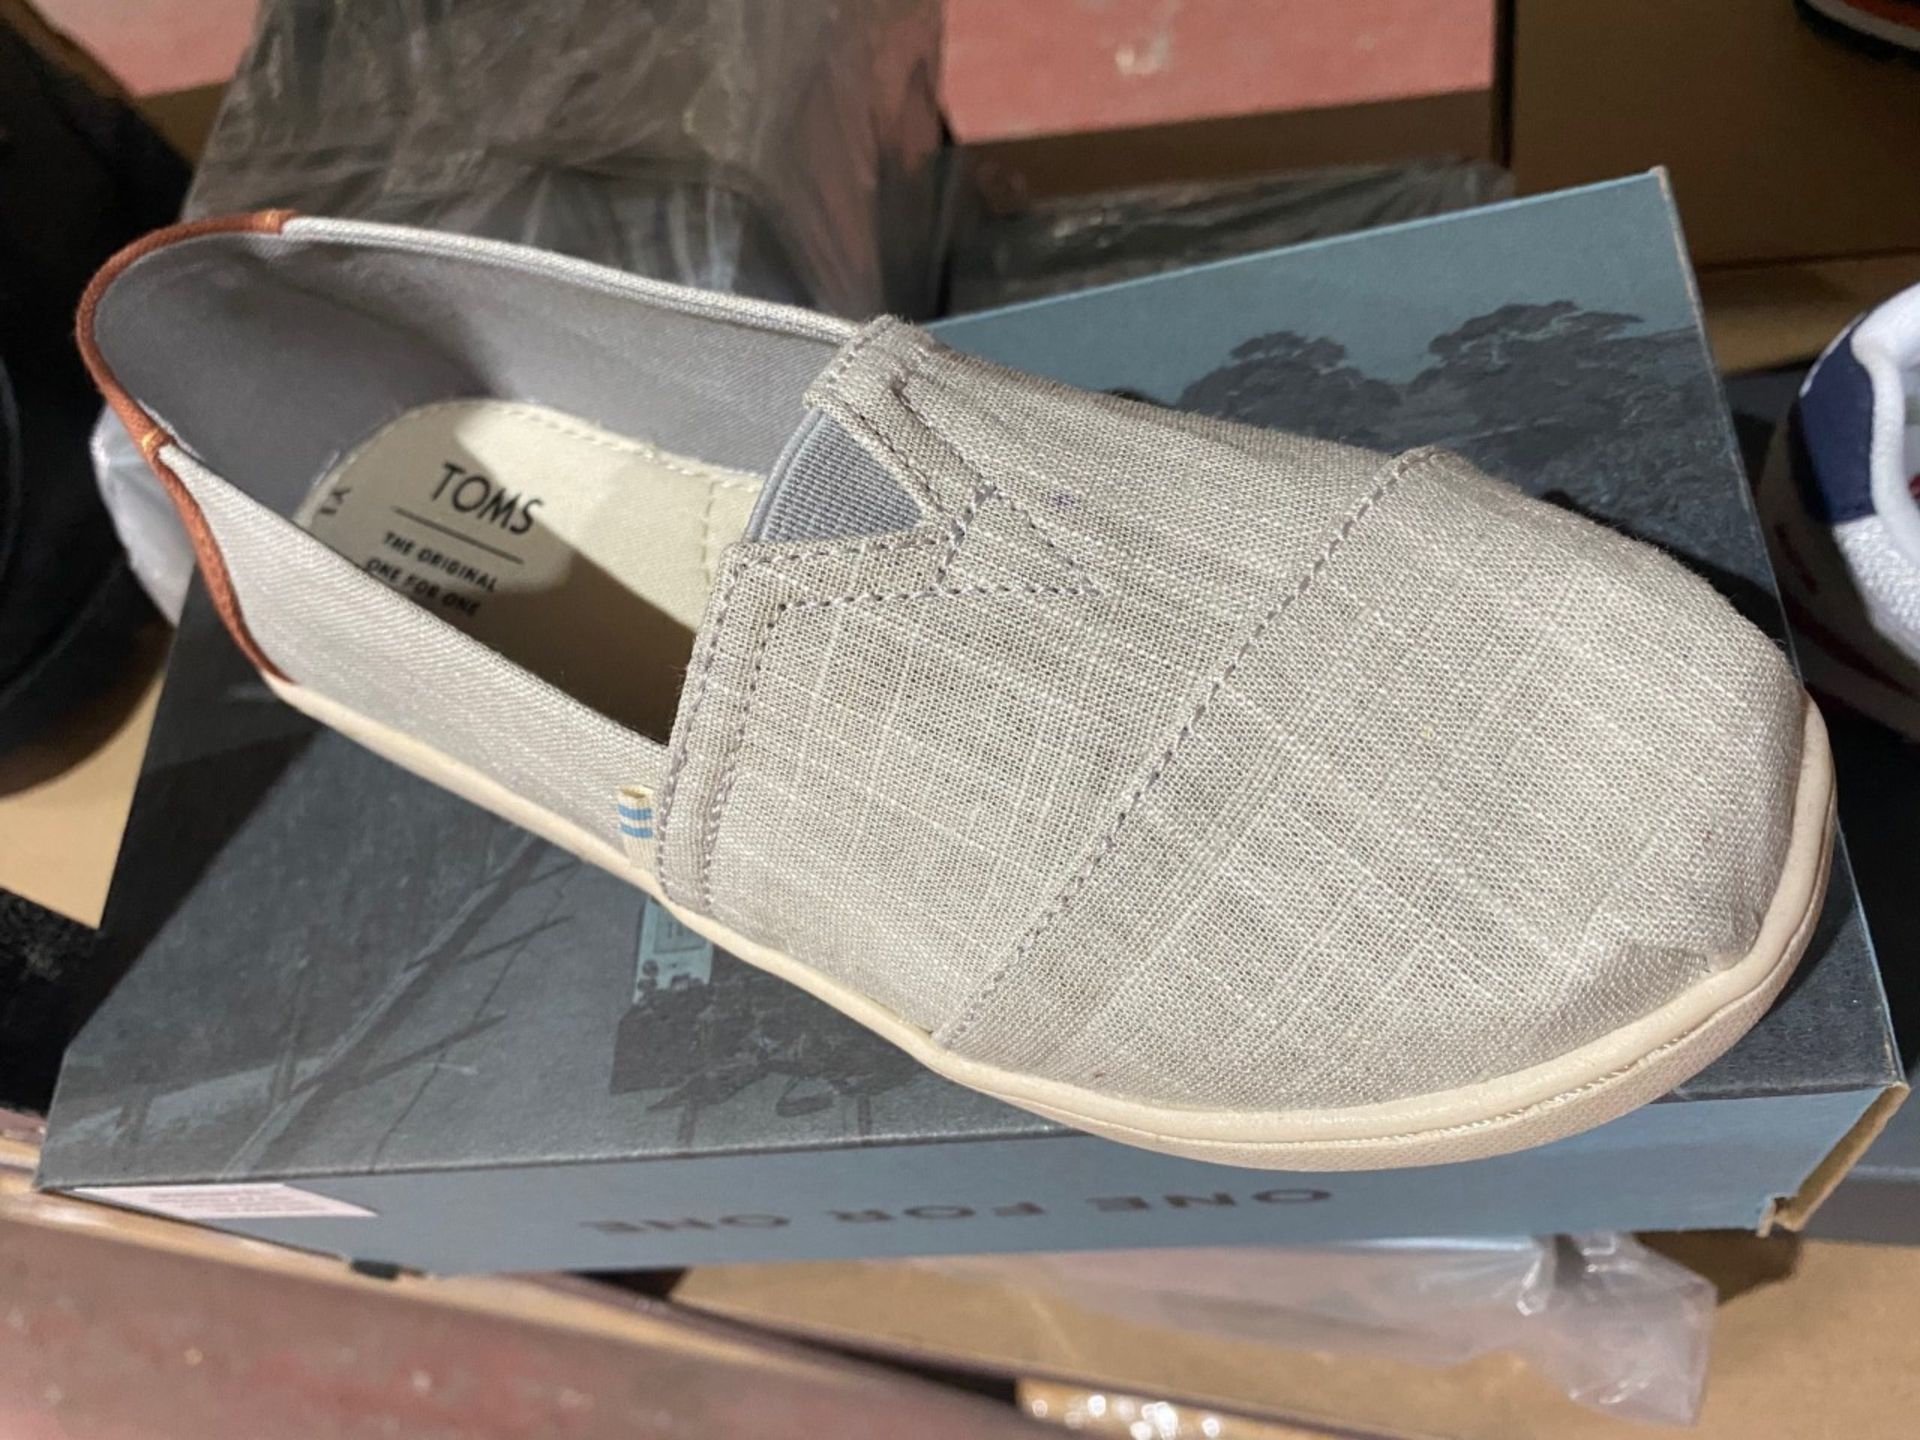 NEW & BOXED TOMS GREY SHOE SIZE INFANT 13 - Image 2 of 2